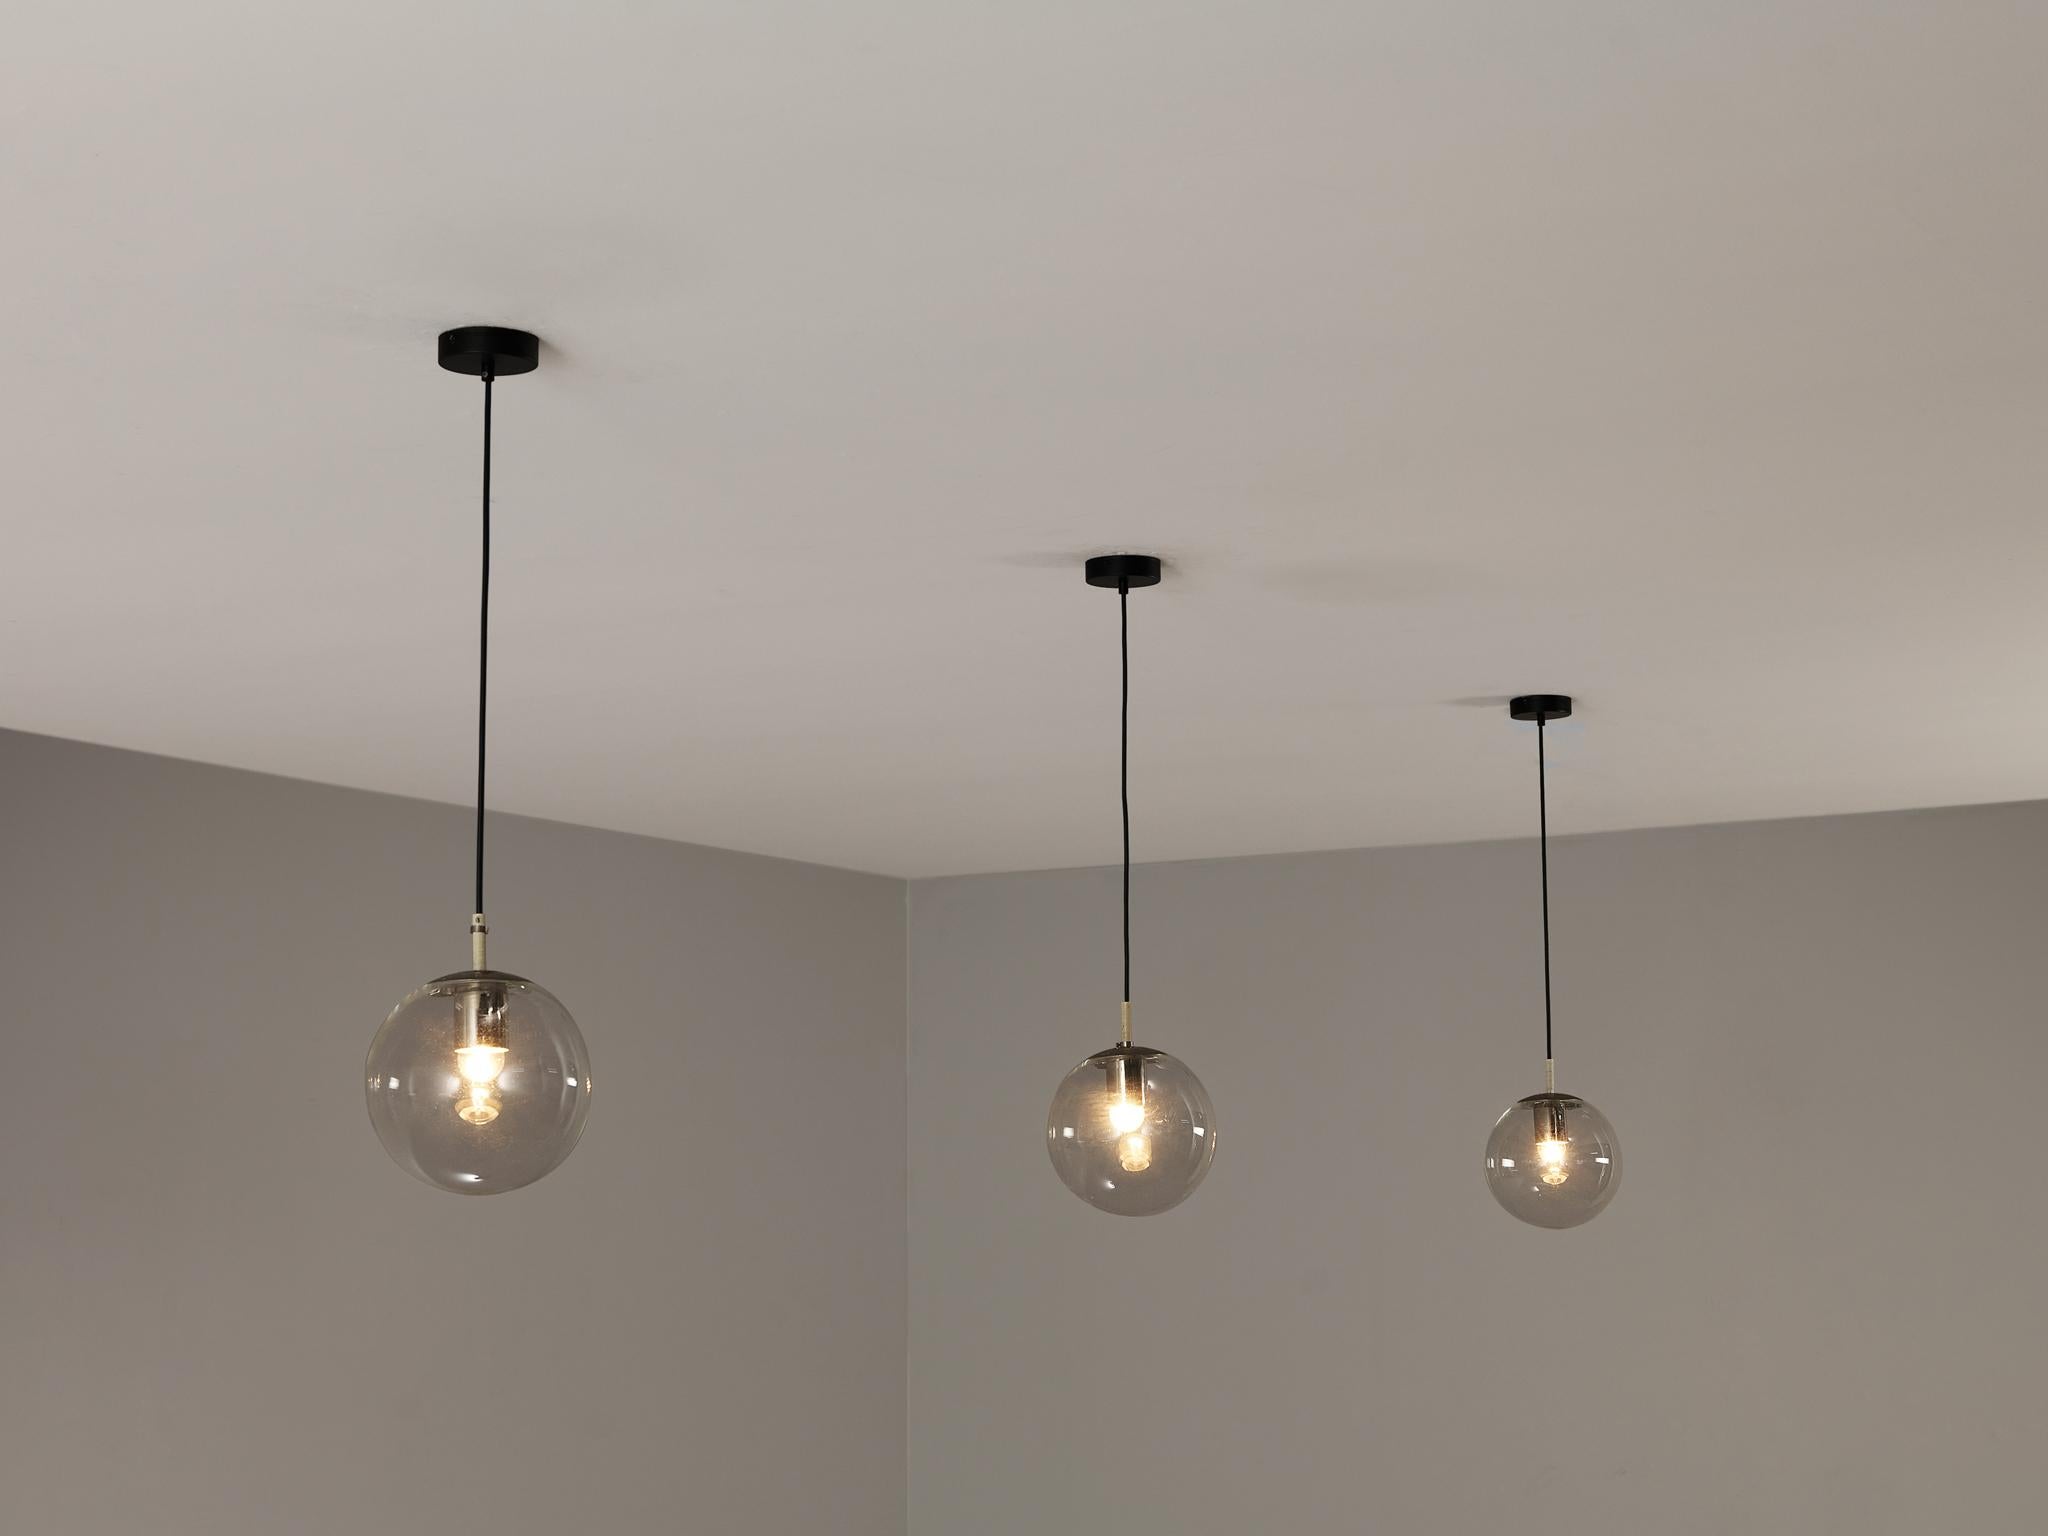 RAAK Amsterdam, pendants, glass, metal, Europe, 1970s.

This atmospheric set of pendant lamps features each a glass orb, casting a gentle and soothing light tone that imbues the space with a vibrant atmosphere. The lamps can be hung above a large